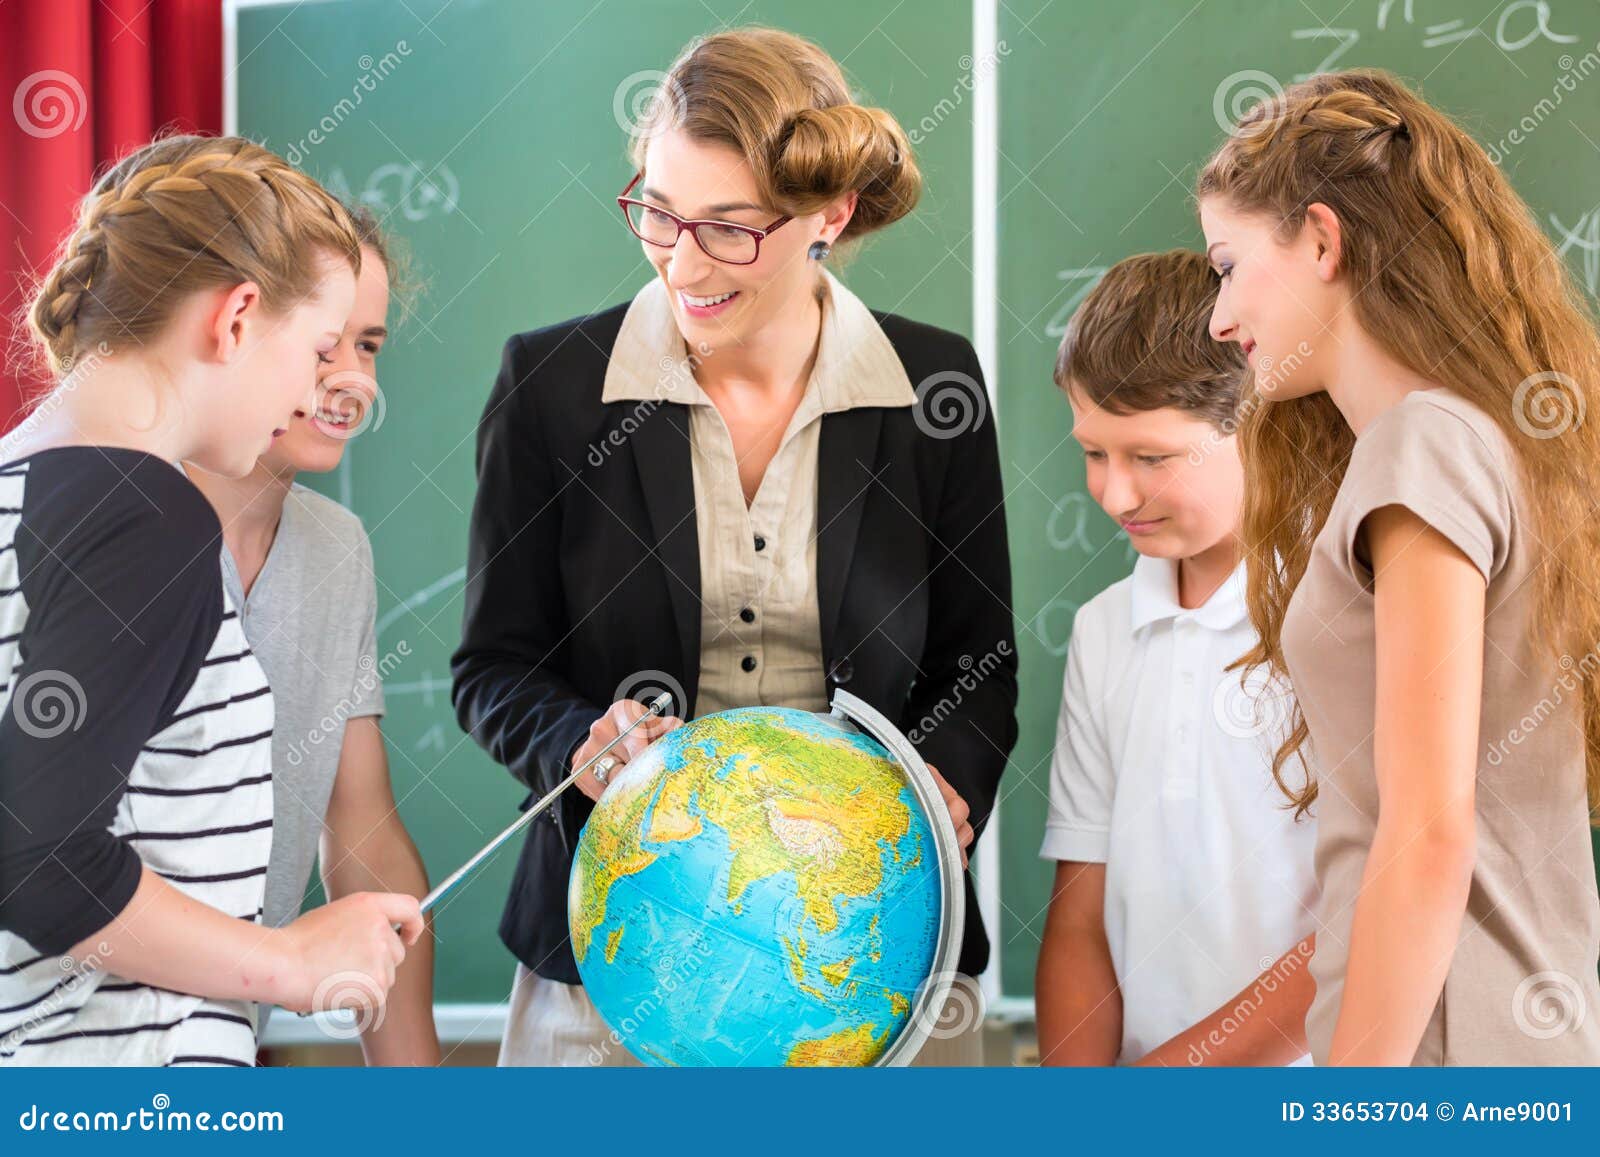 teacher educate students having geography lessons in school